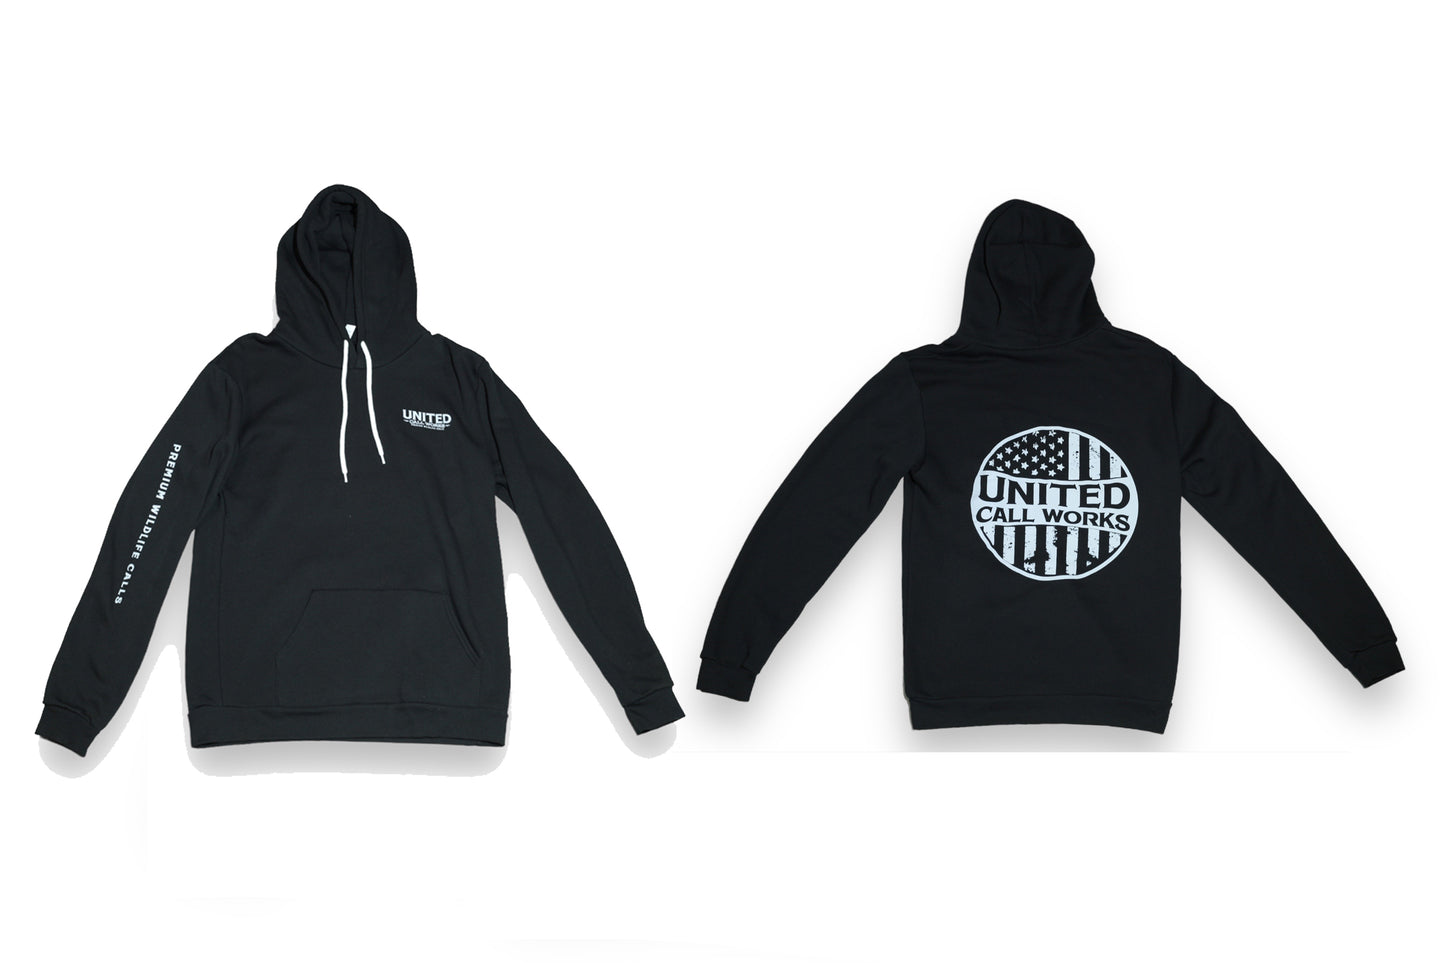 UCW Black and White Hoodie